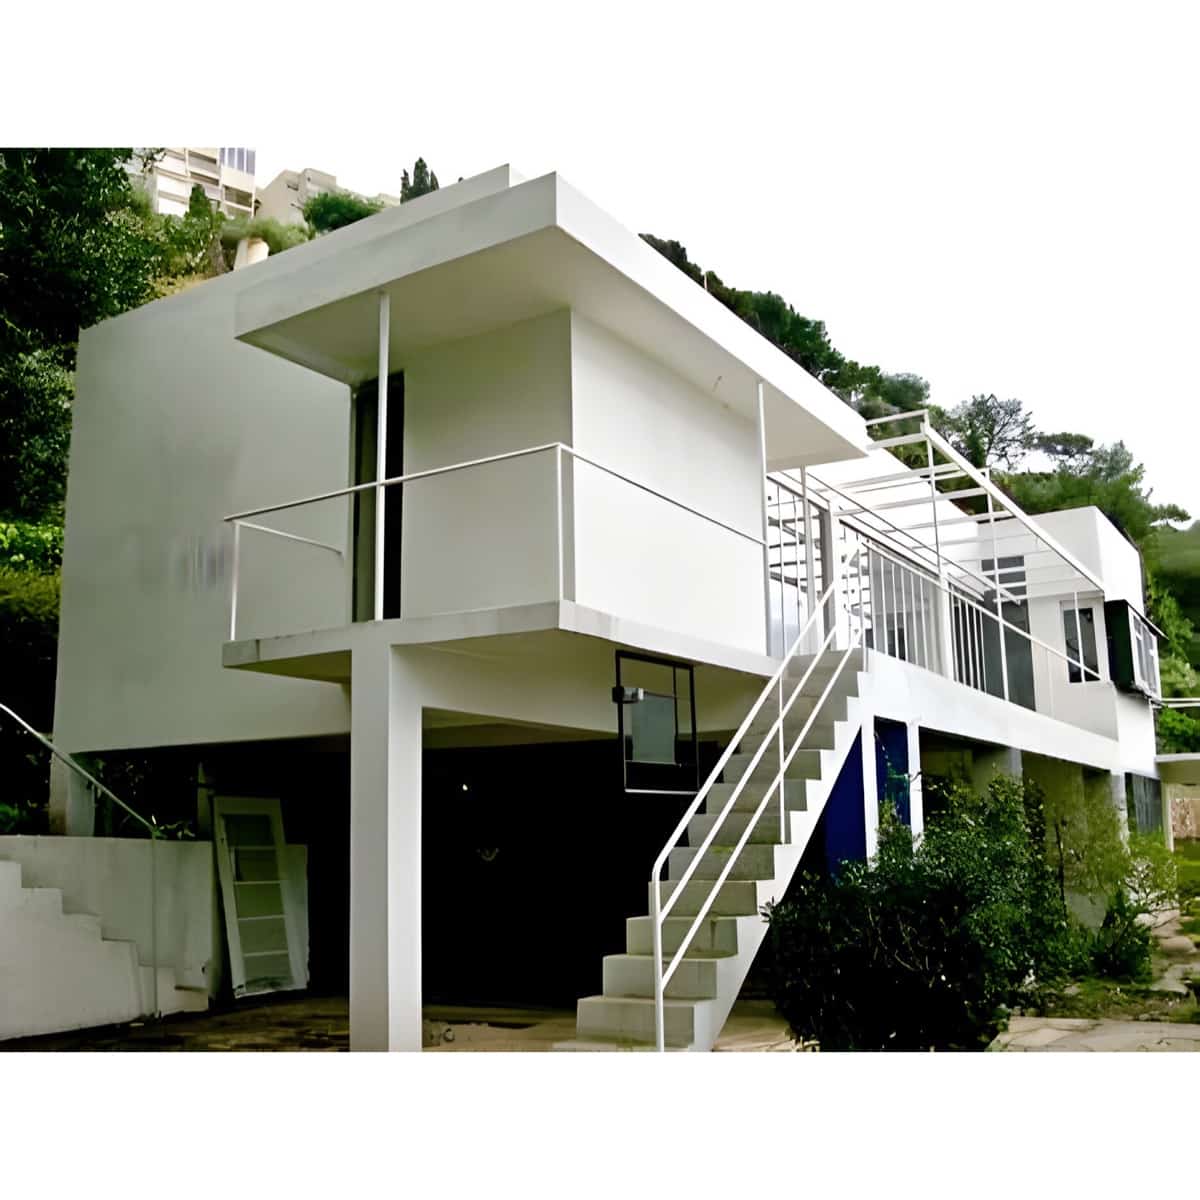 Le Corbusier, Eileen Gray, and the E1027 House: Unveiling the 